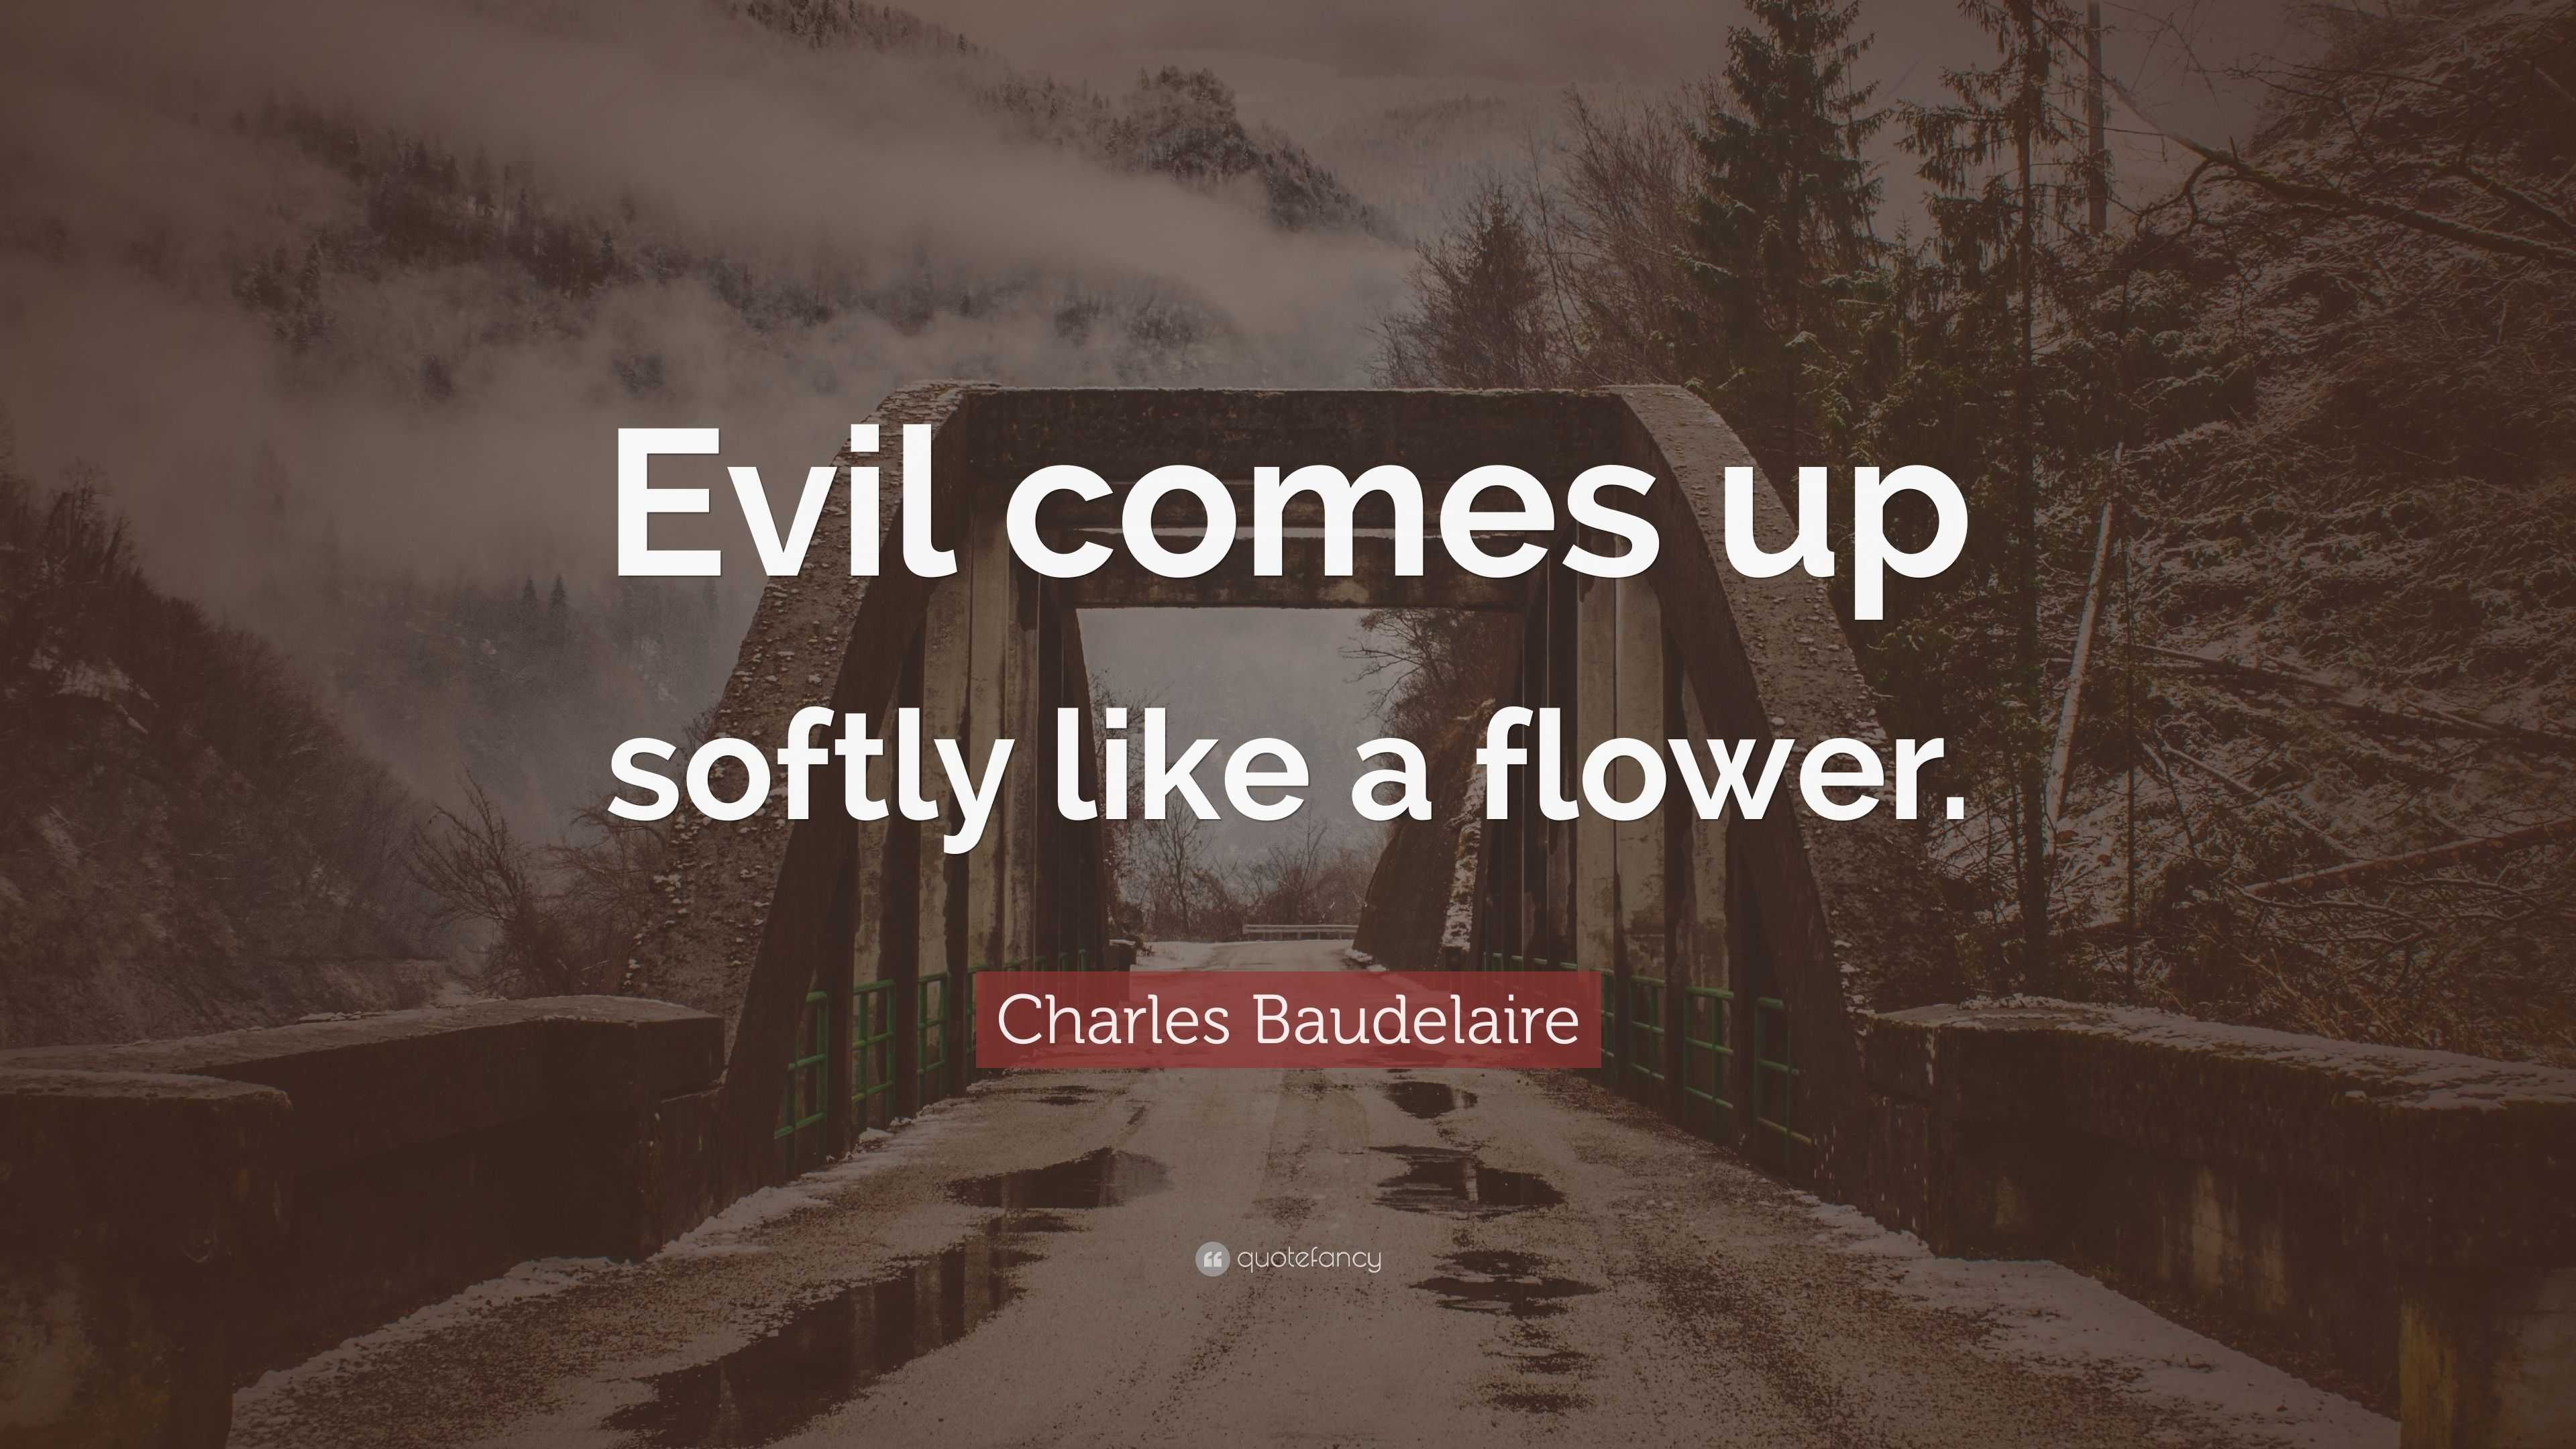 Charles Baudelaire Quote: “Evil comes up softly like a flower.”